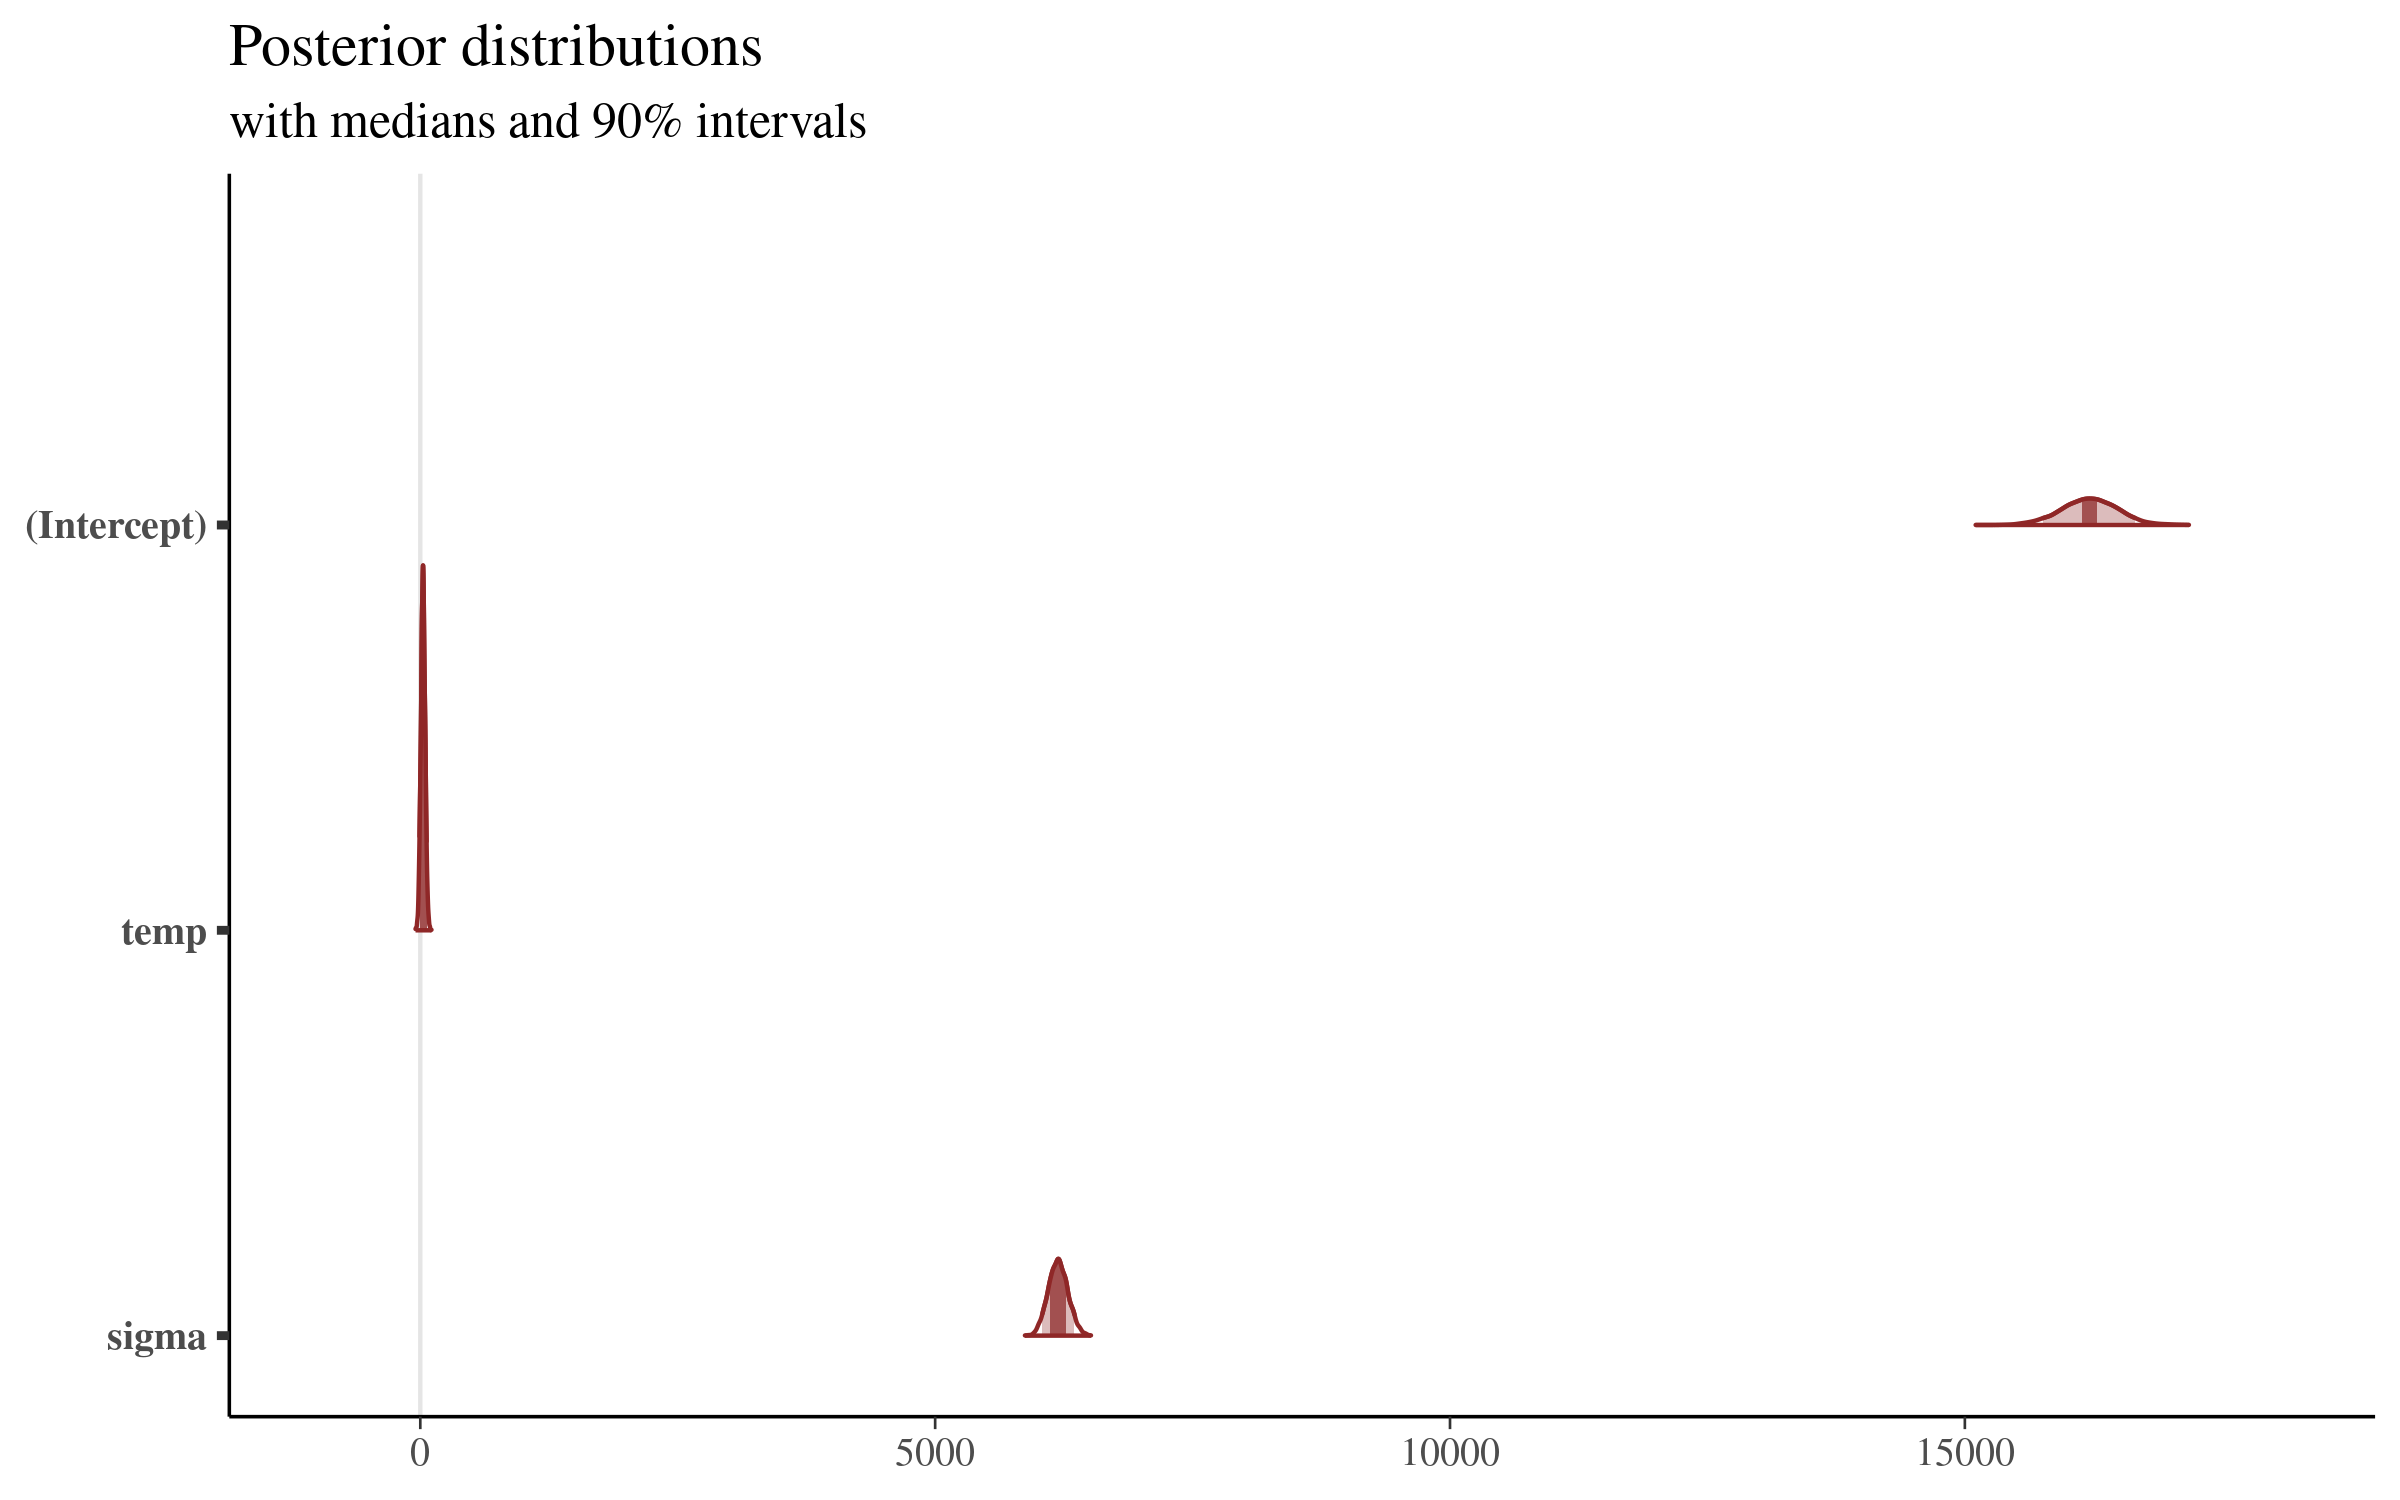 posterior distributions - all coefficients